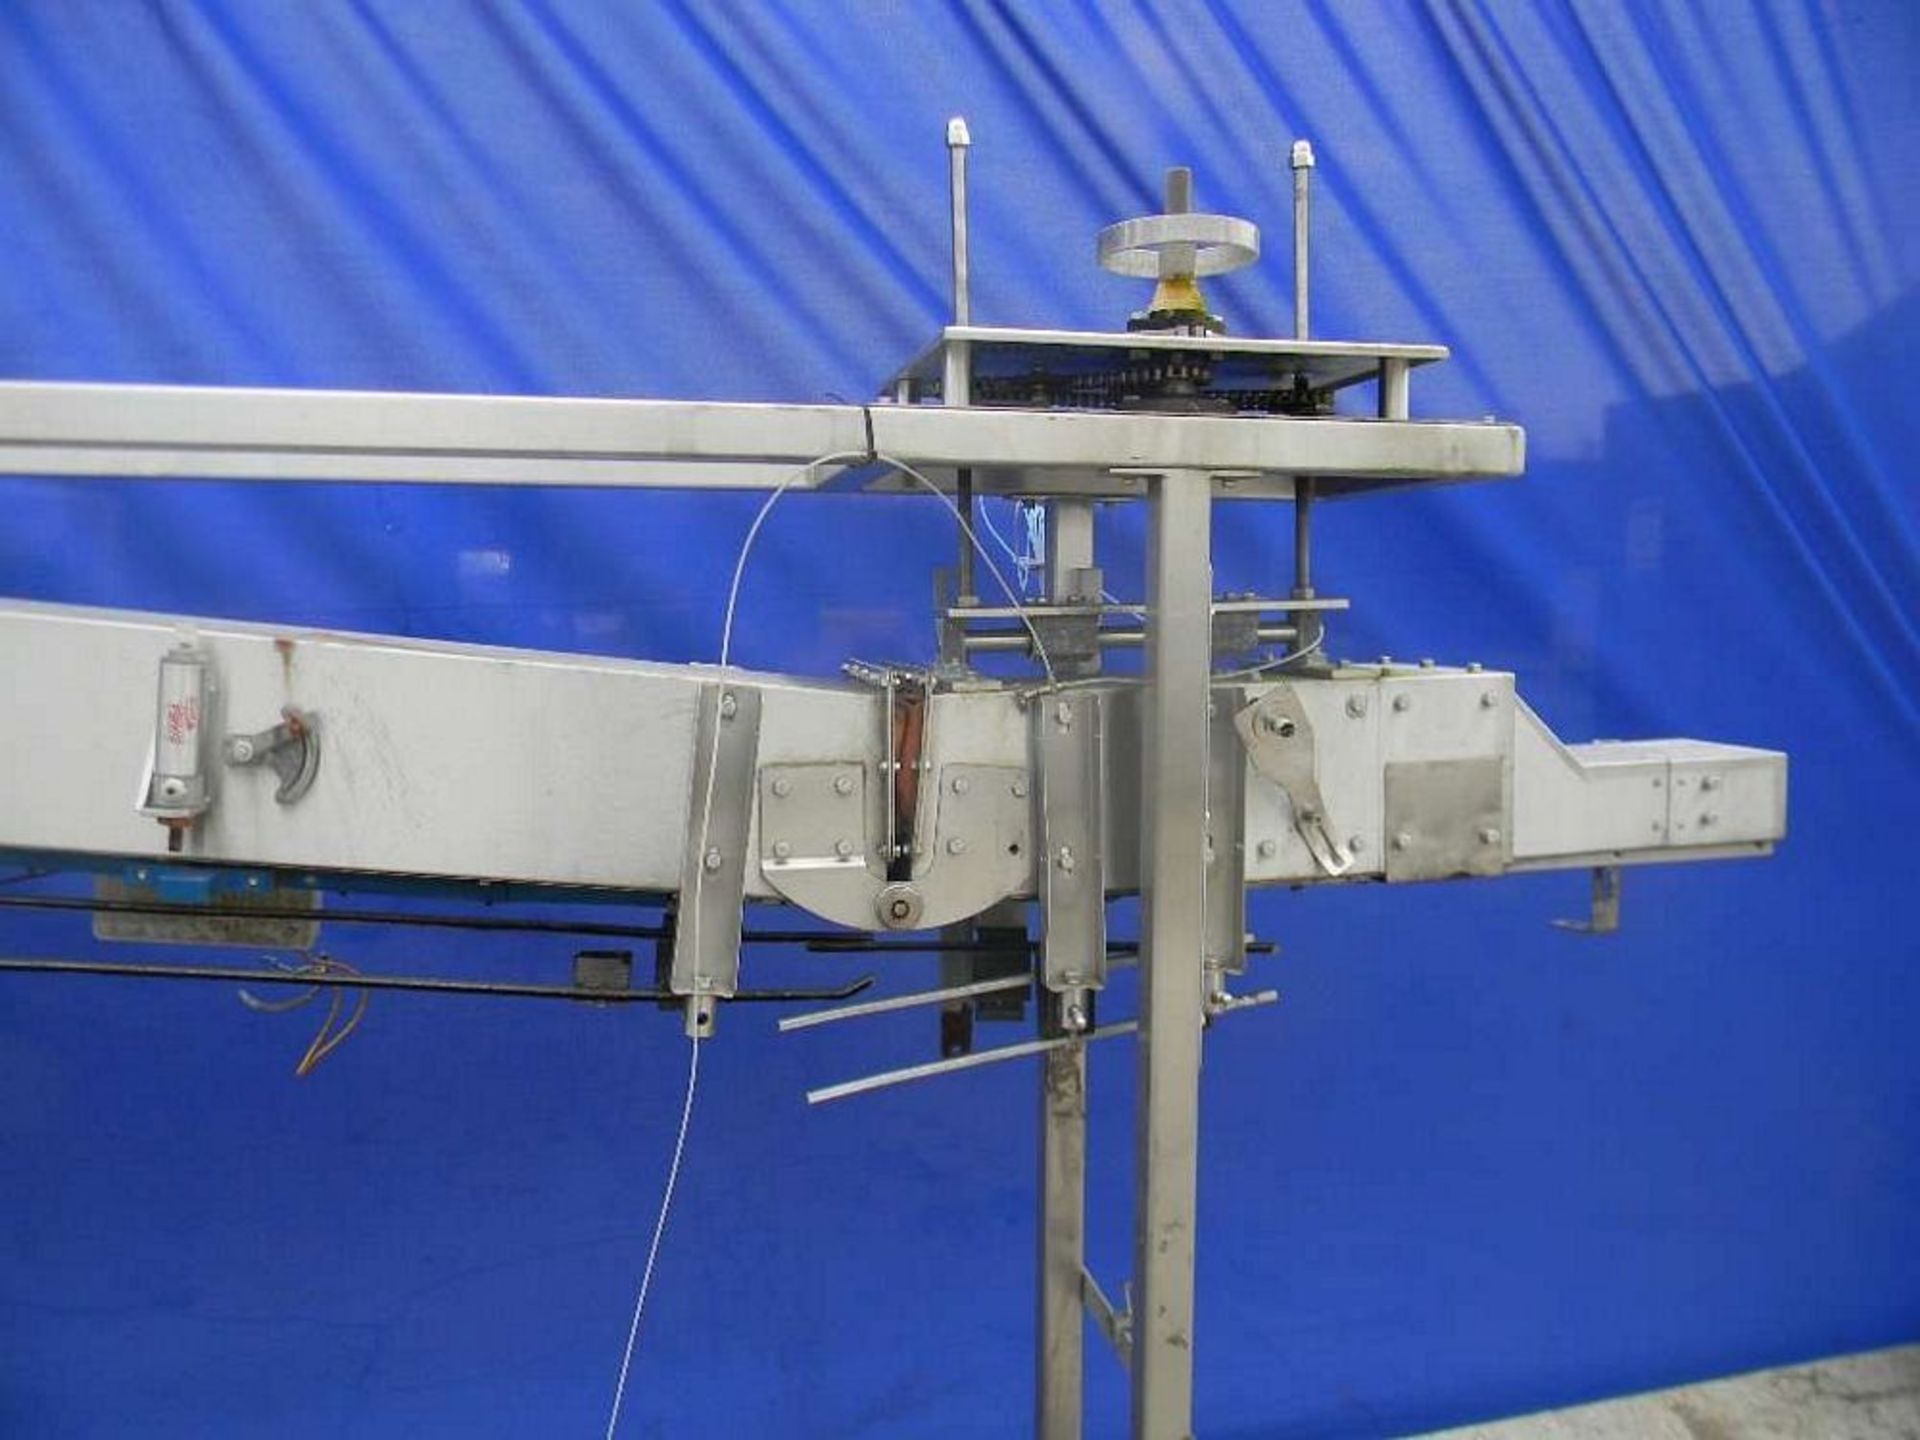 Qty (1) Ling Air Conveyor Pickup Module - All Stainless Steel Construction - Adjustable Infeed - Image 4 of 5